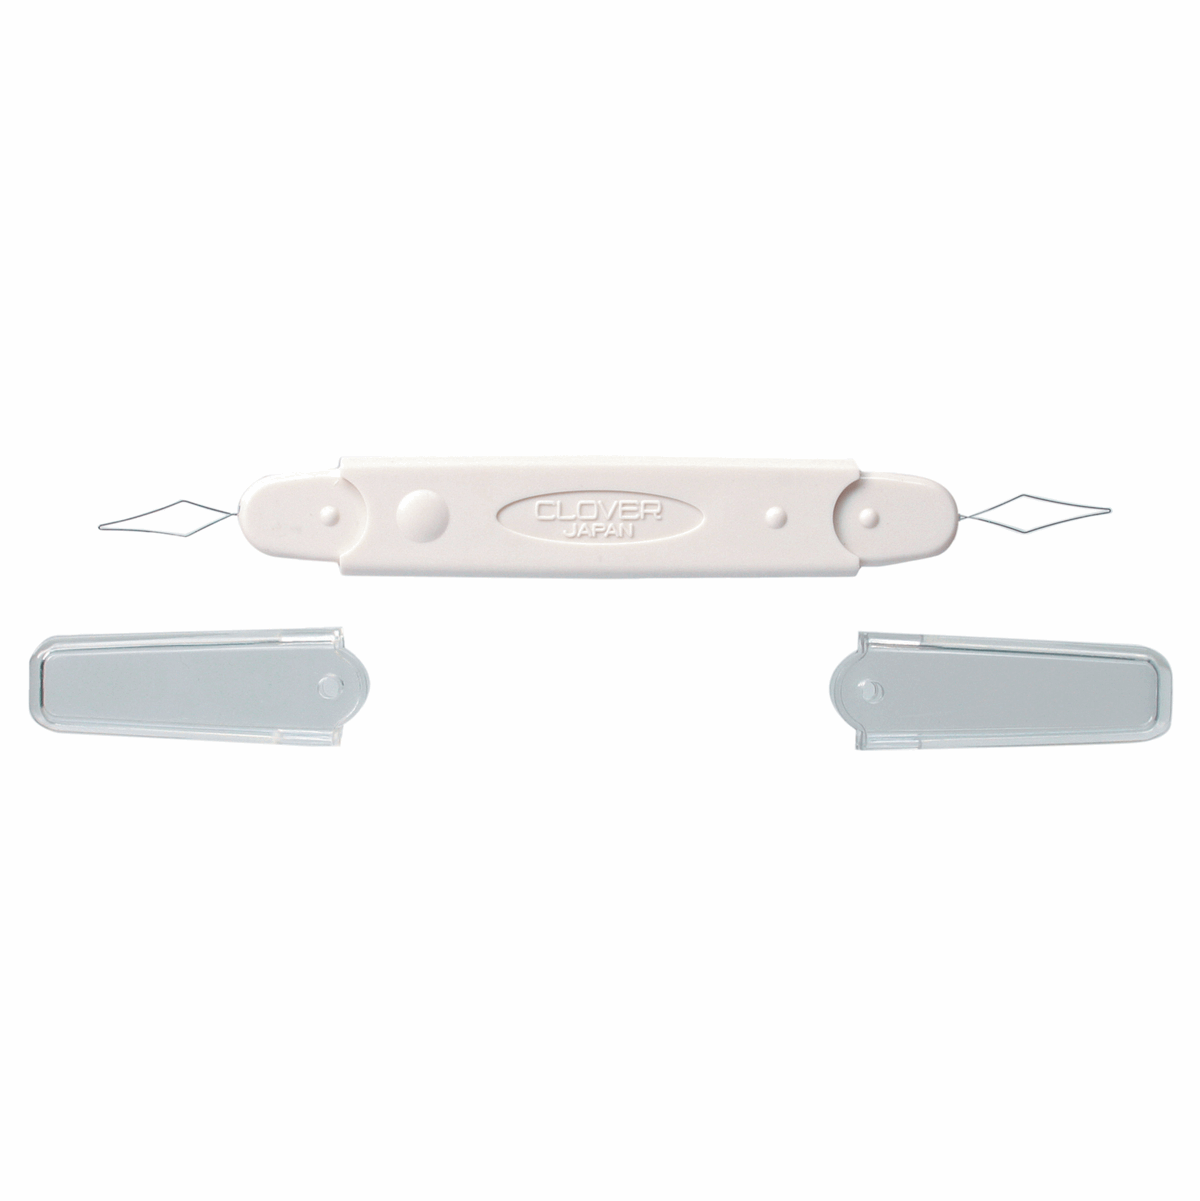 Clover Double Ended Needle Threader for Fine Embroidery